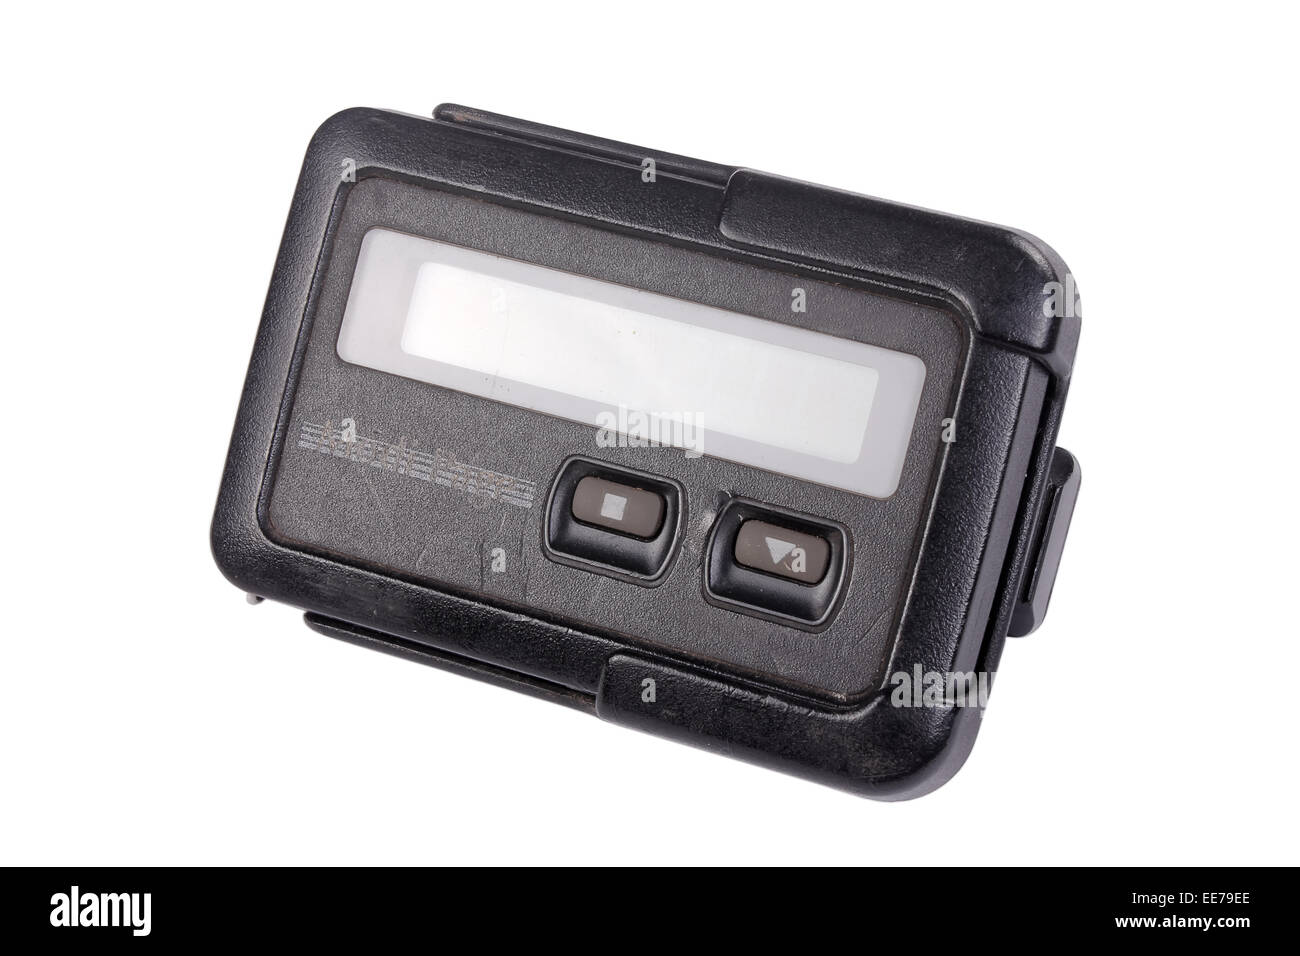 Pager on white backdrop Stock Photo